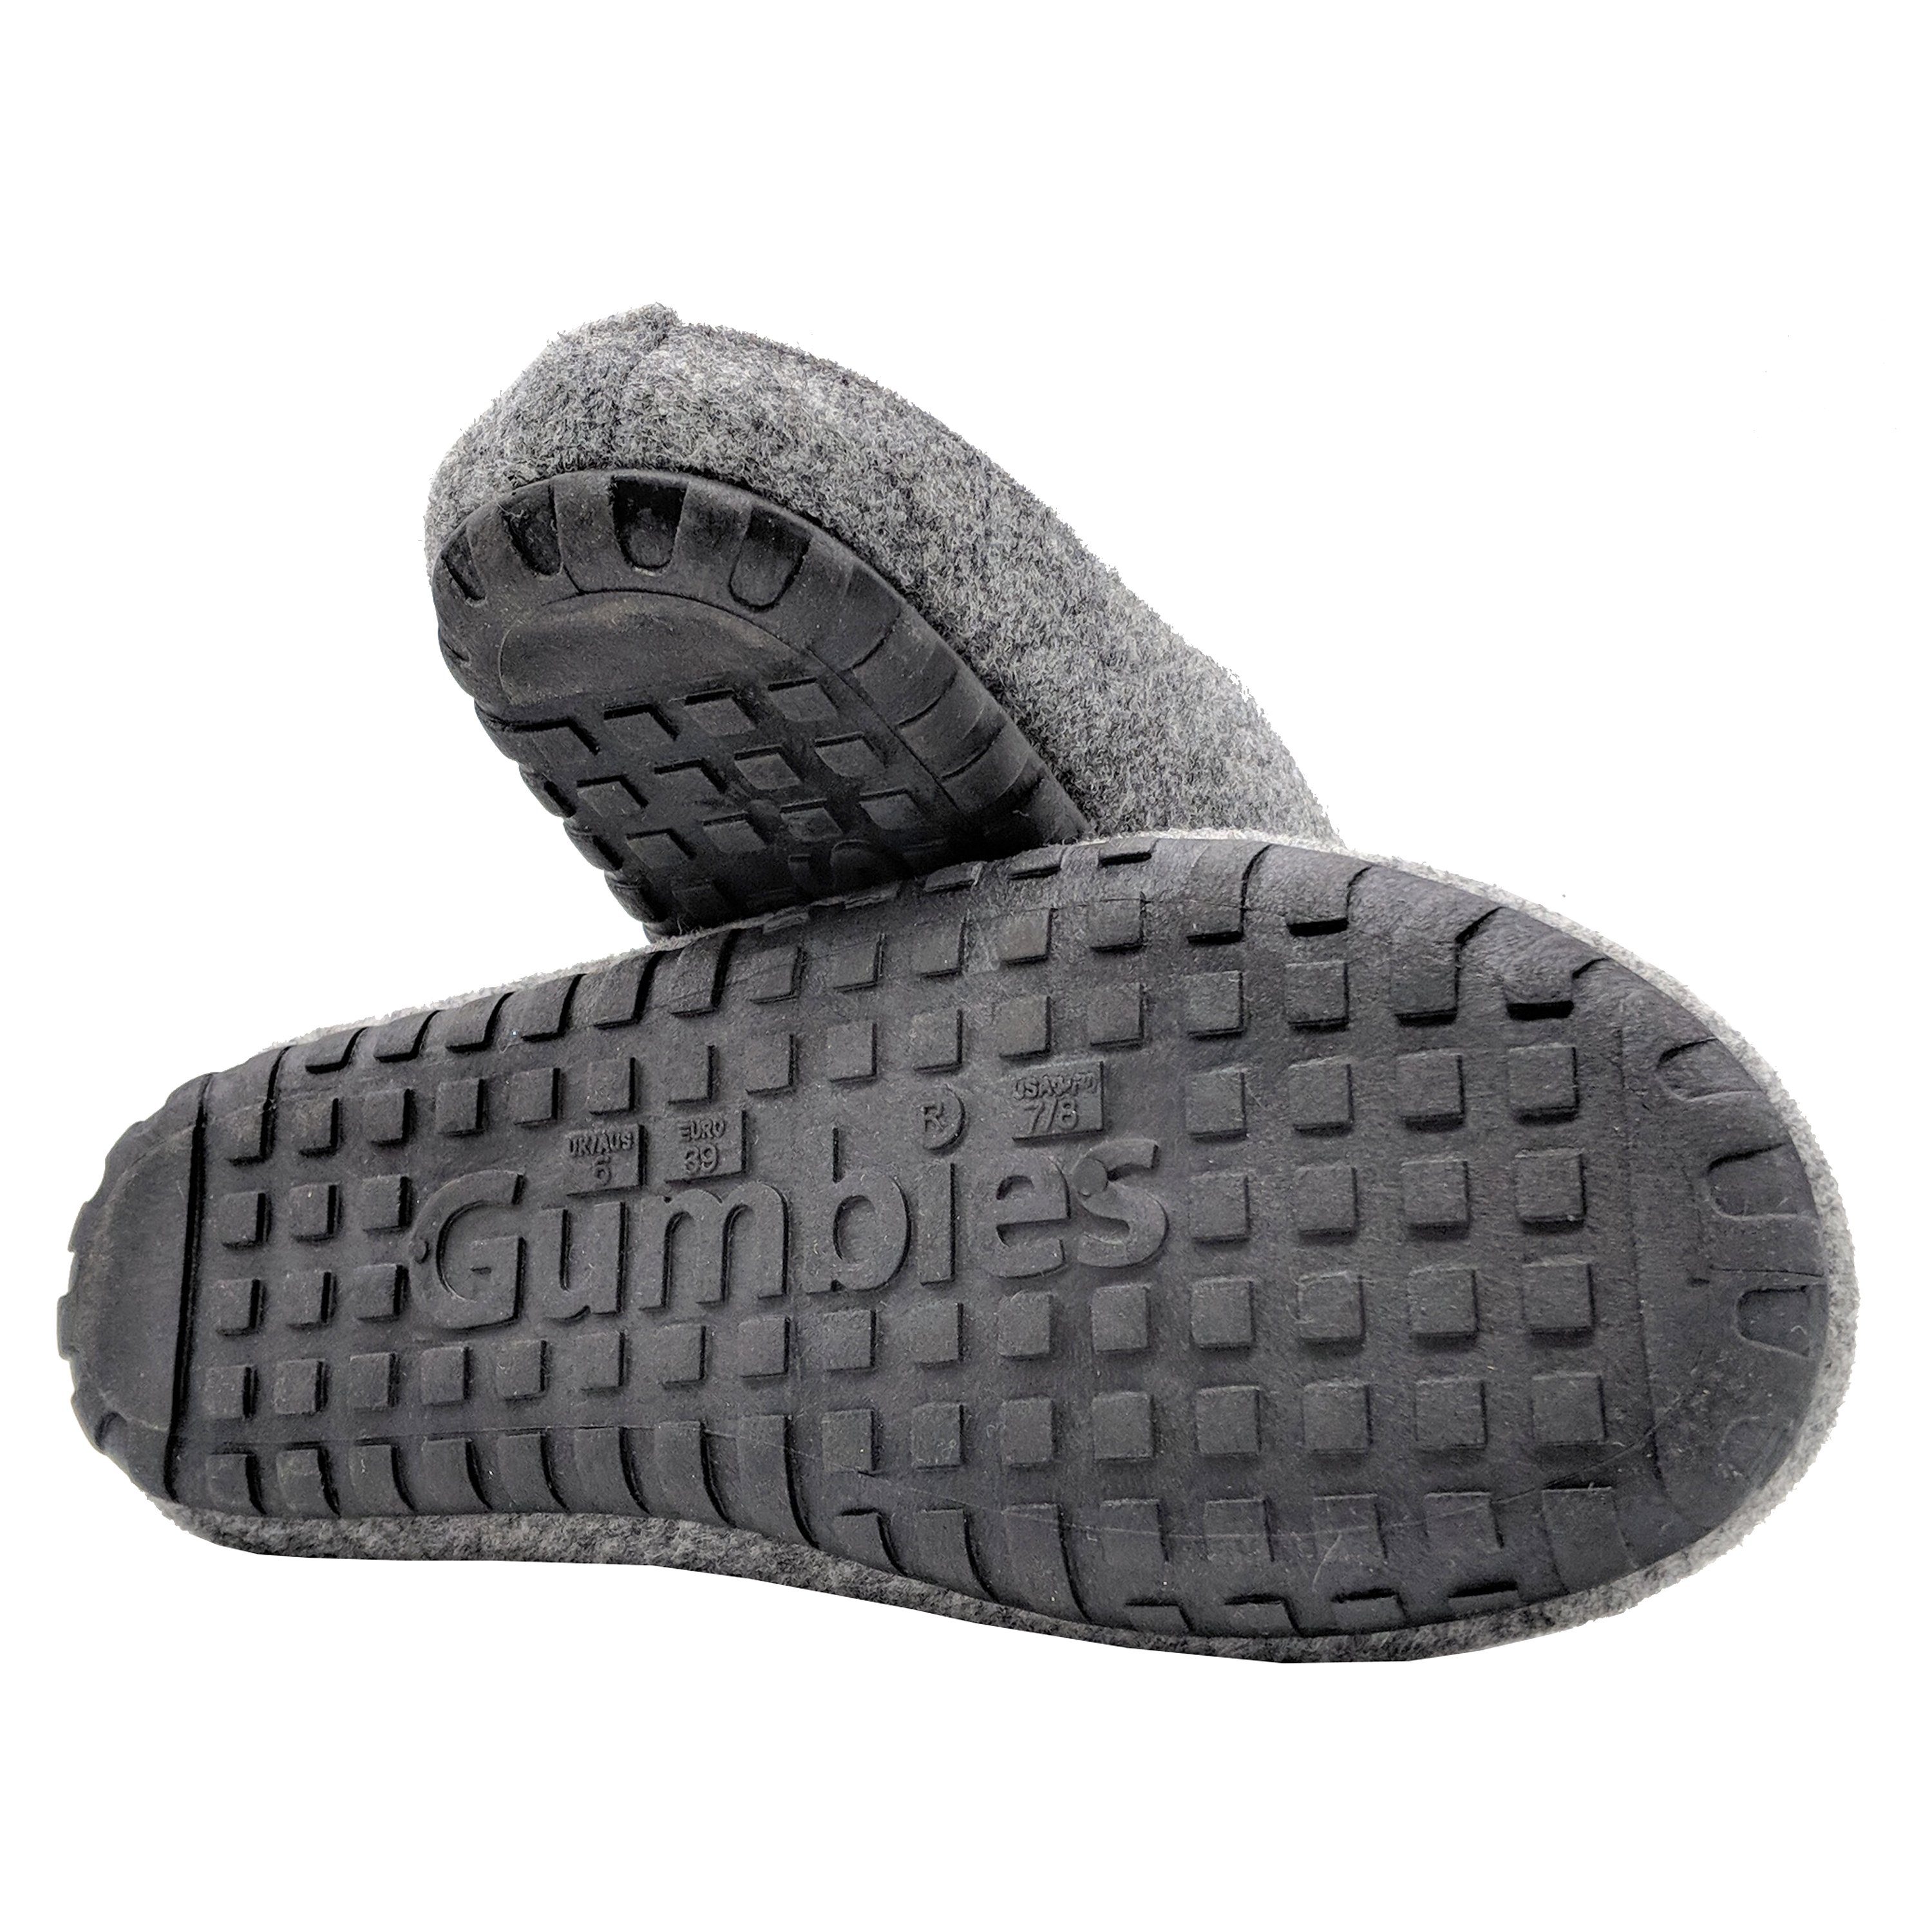 Outback Slipper »in Grey Designs« aus recycelten farbenfrohen in Charcoal Gumbies Hausschuh Materialien